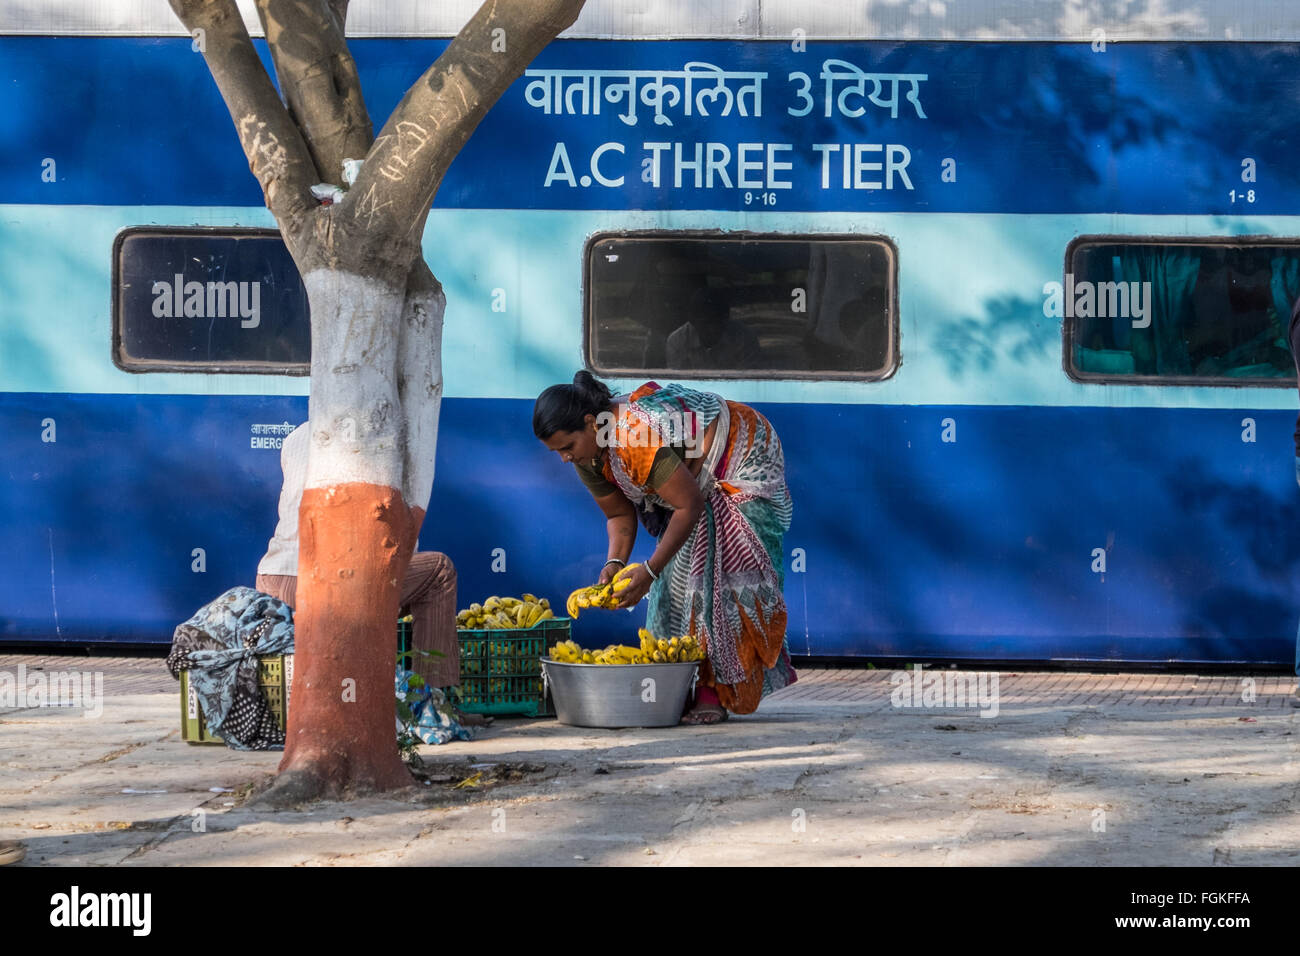 Vendor selling snacks to passengers on an Indian railways train Stock Photo